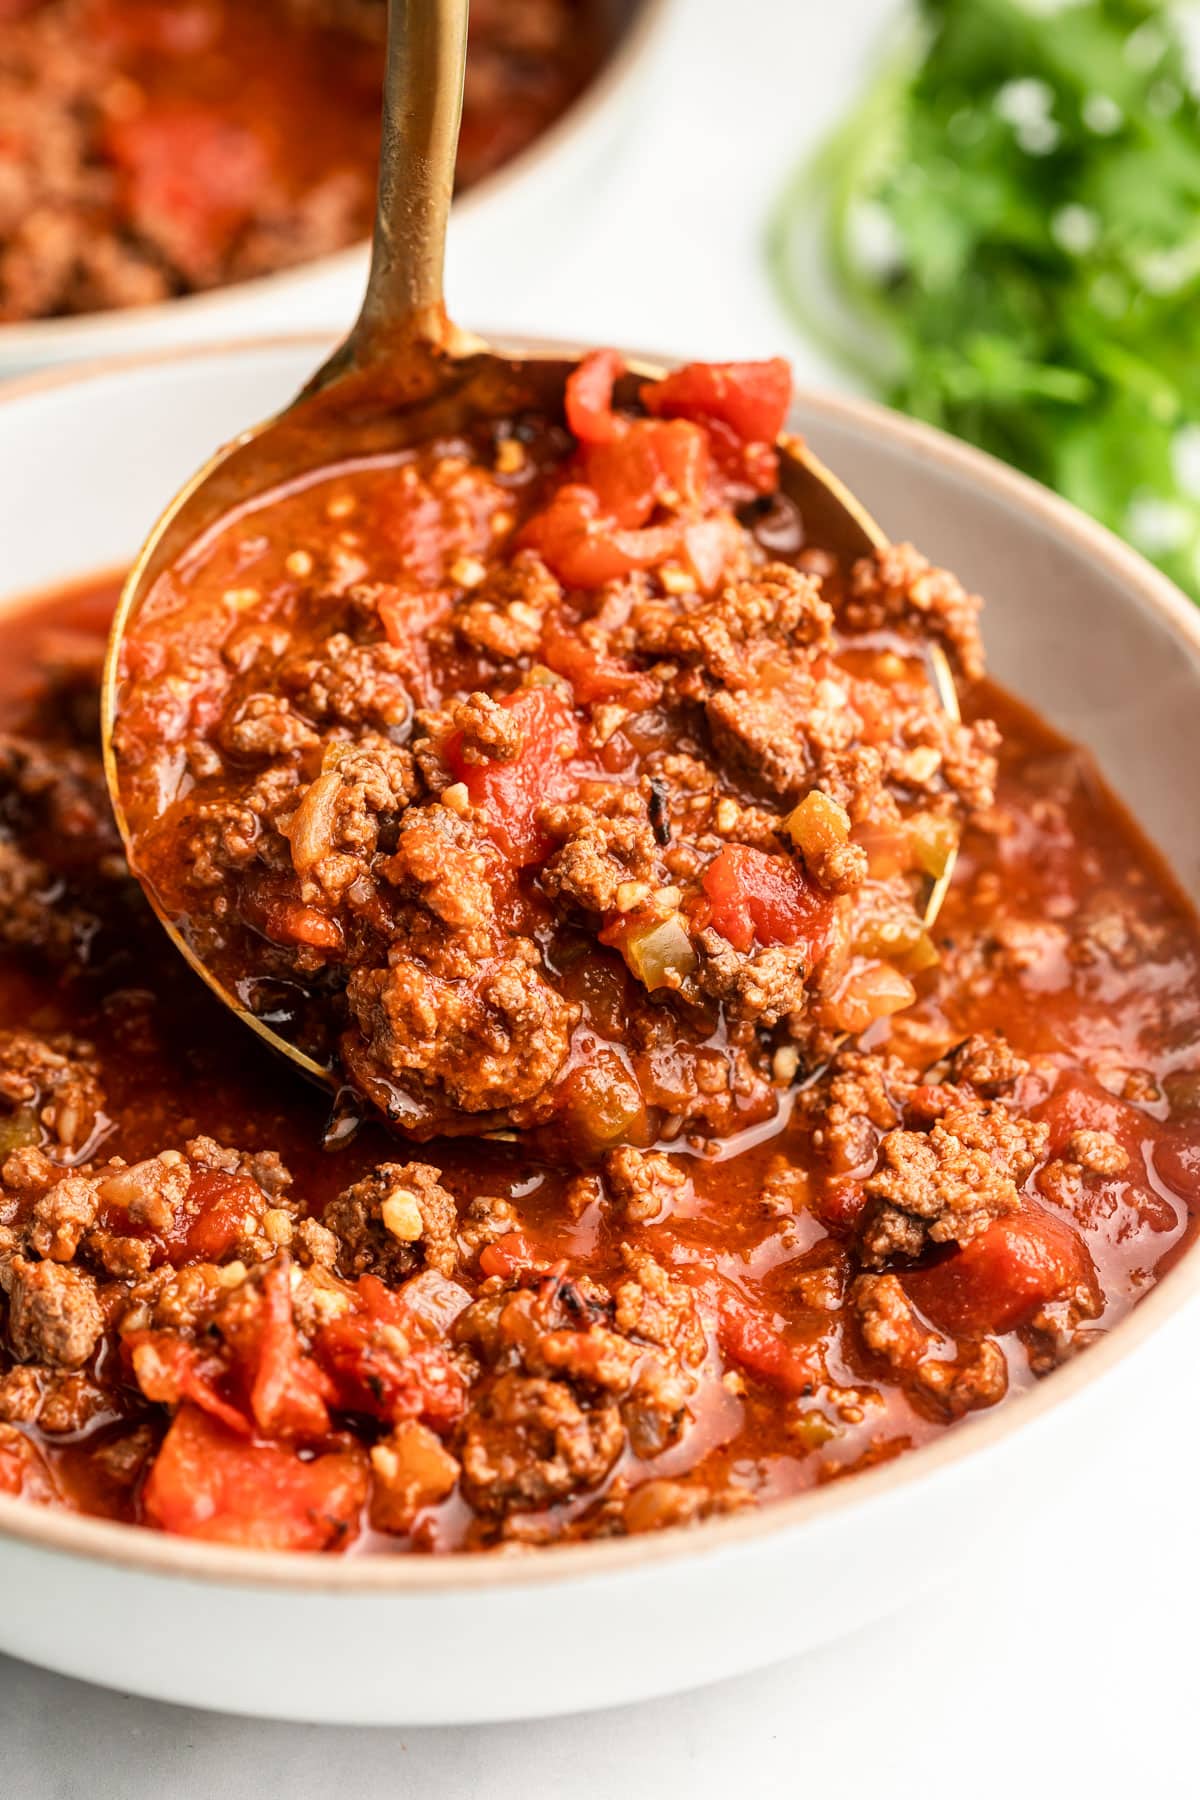 https://thewholecook.com/wp-content/uploads/2023/10/No-Bean-30-Minute-Chili-1.jpg